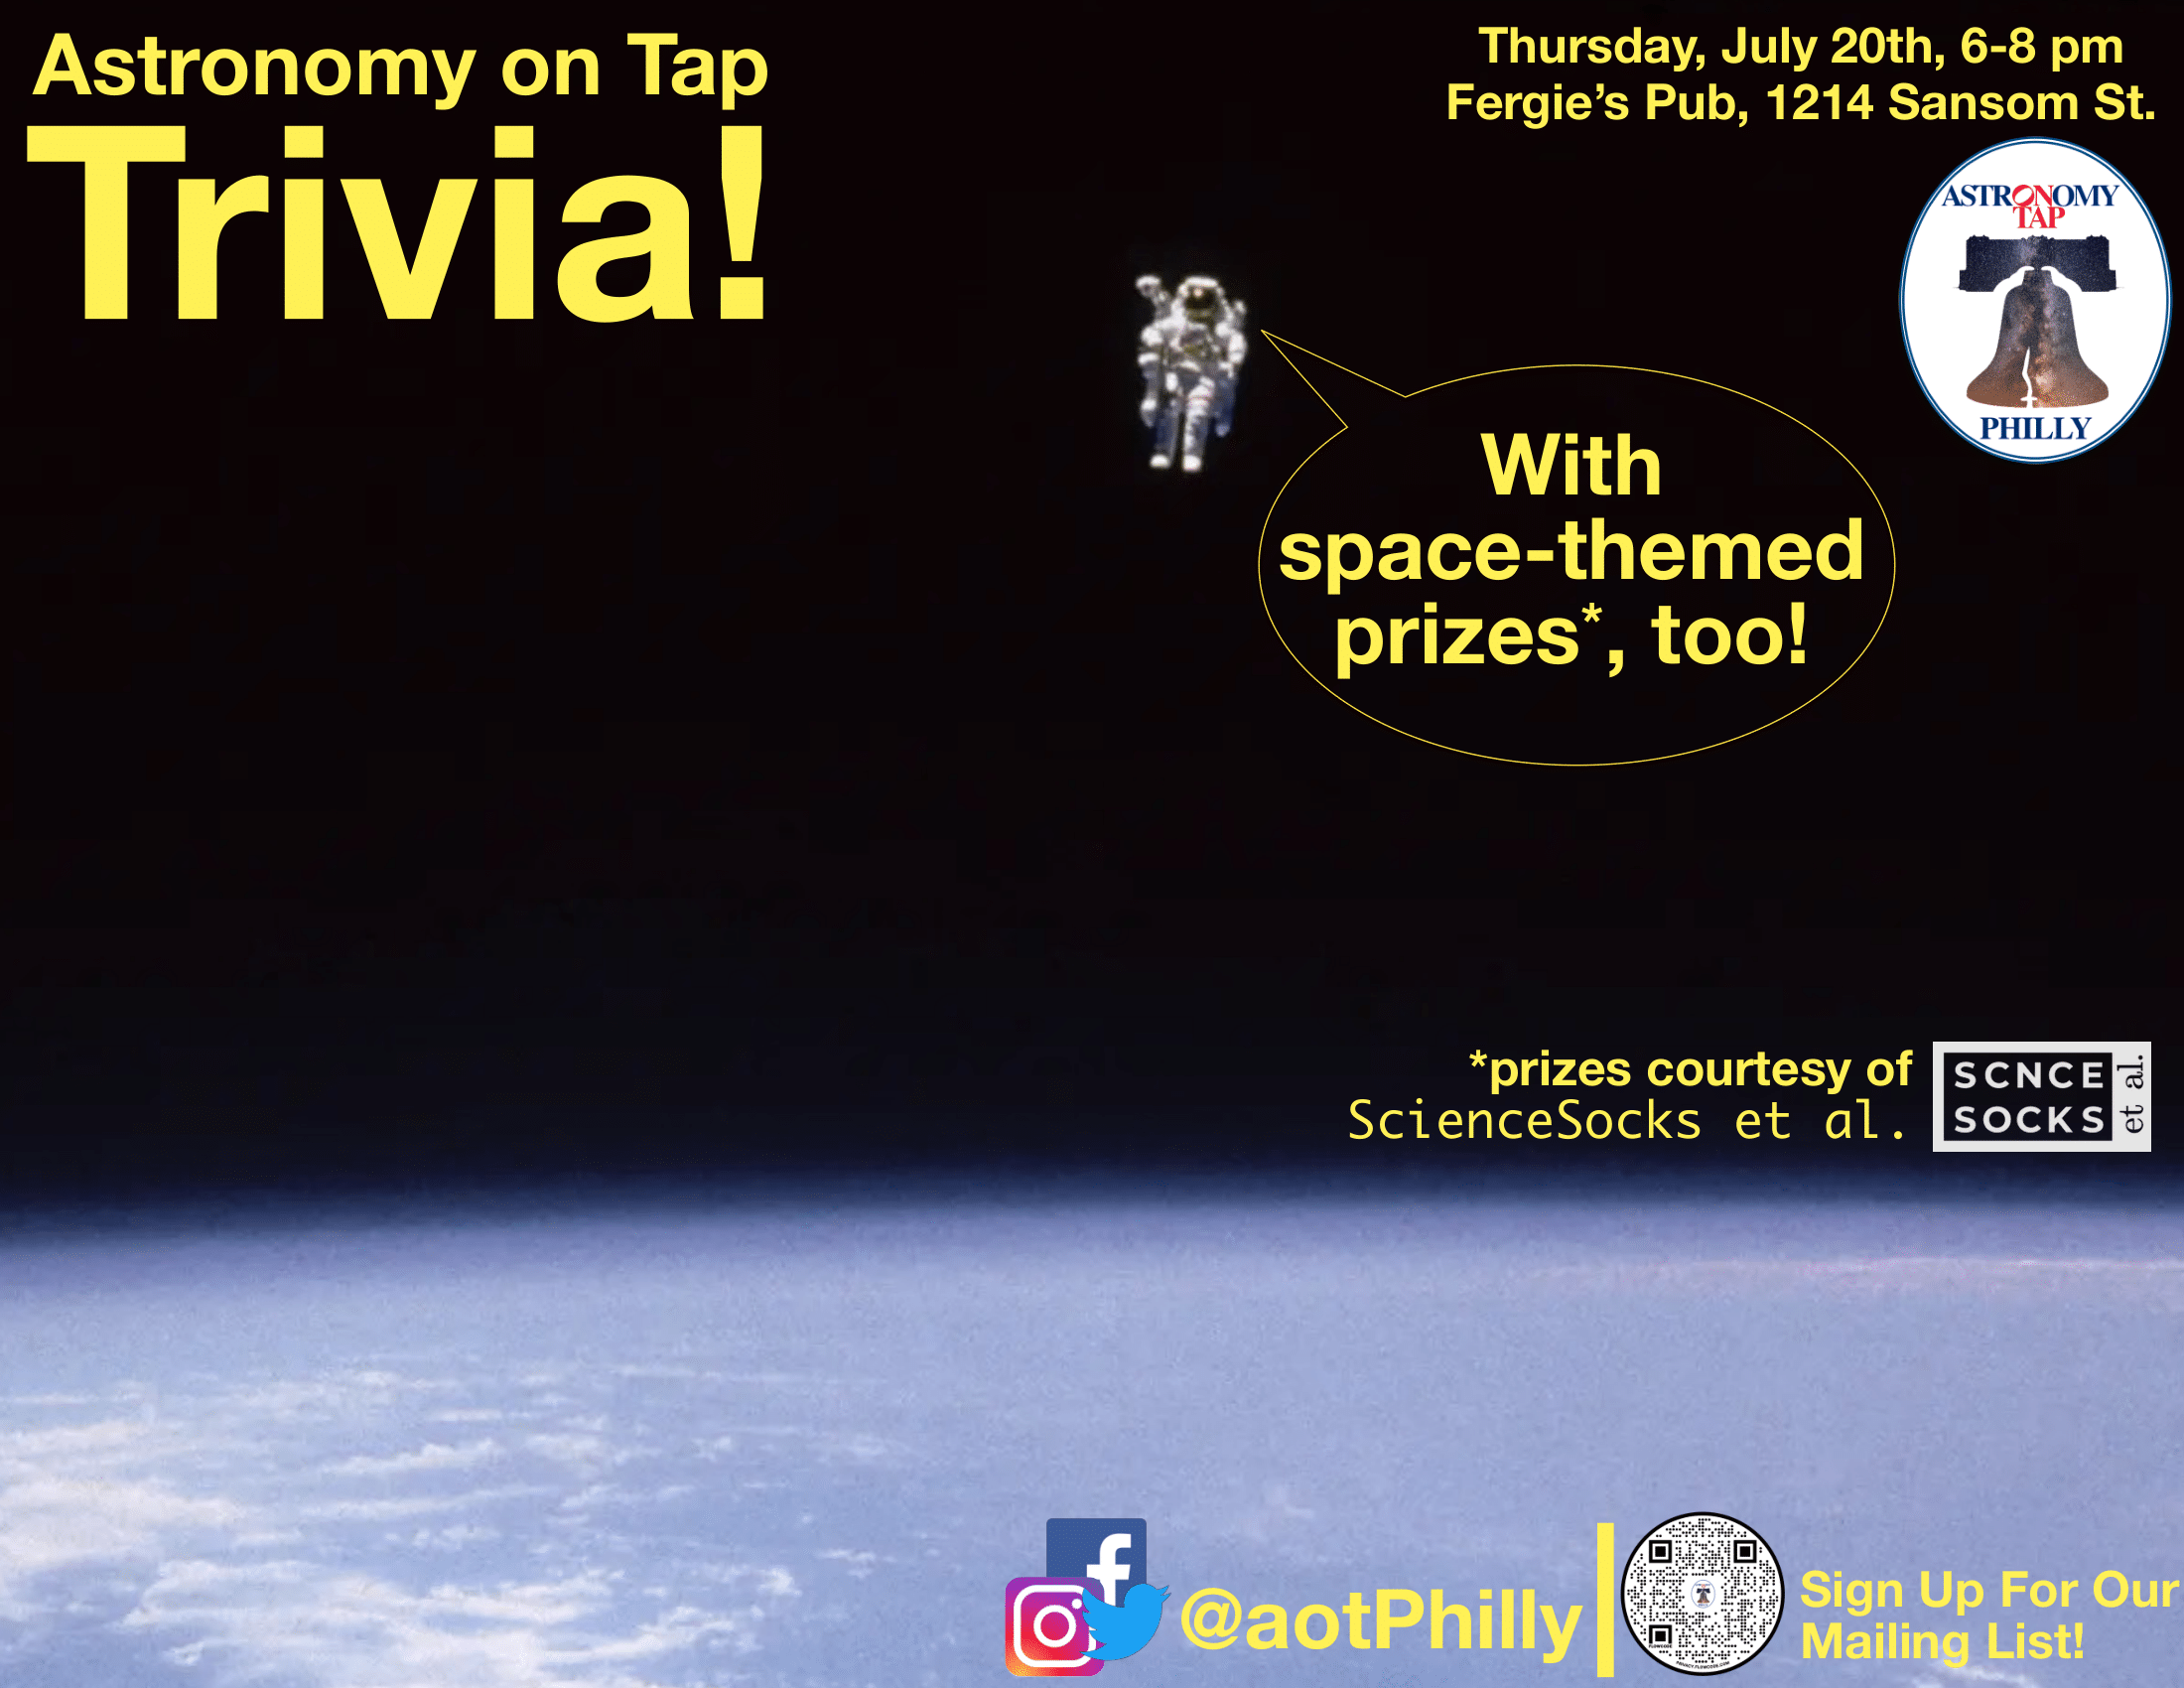 a picture in space. on the bottom half of the screen, you can see earth, the top half is black space, with a little space person floating with a text bubble that says "with space-themed prizes, too!". Yellow text on top left that says "Astronomy on Tap Trivia!" Yellow Text on top right that says "Thursday, July 20th, 6-8pm, Fergie's Pub, 1214 Sansom Street." The Philadelphia AoT logo is also towards the top right, the Philadelphia AoT socials are on bottom right, and somewhere floating in the middle it says: "*prizes courtesy of ScienceSocks et al."